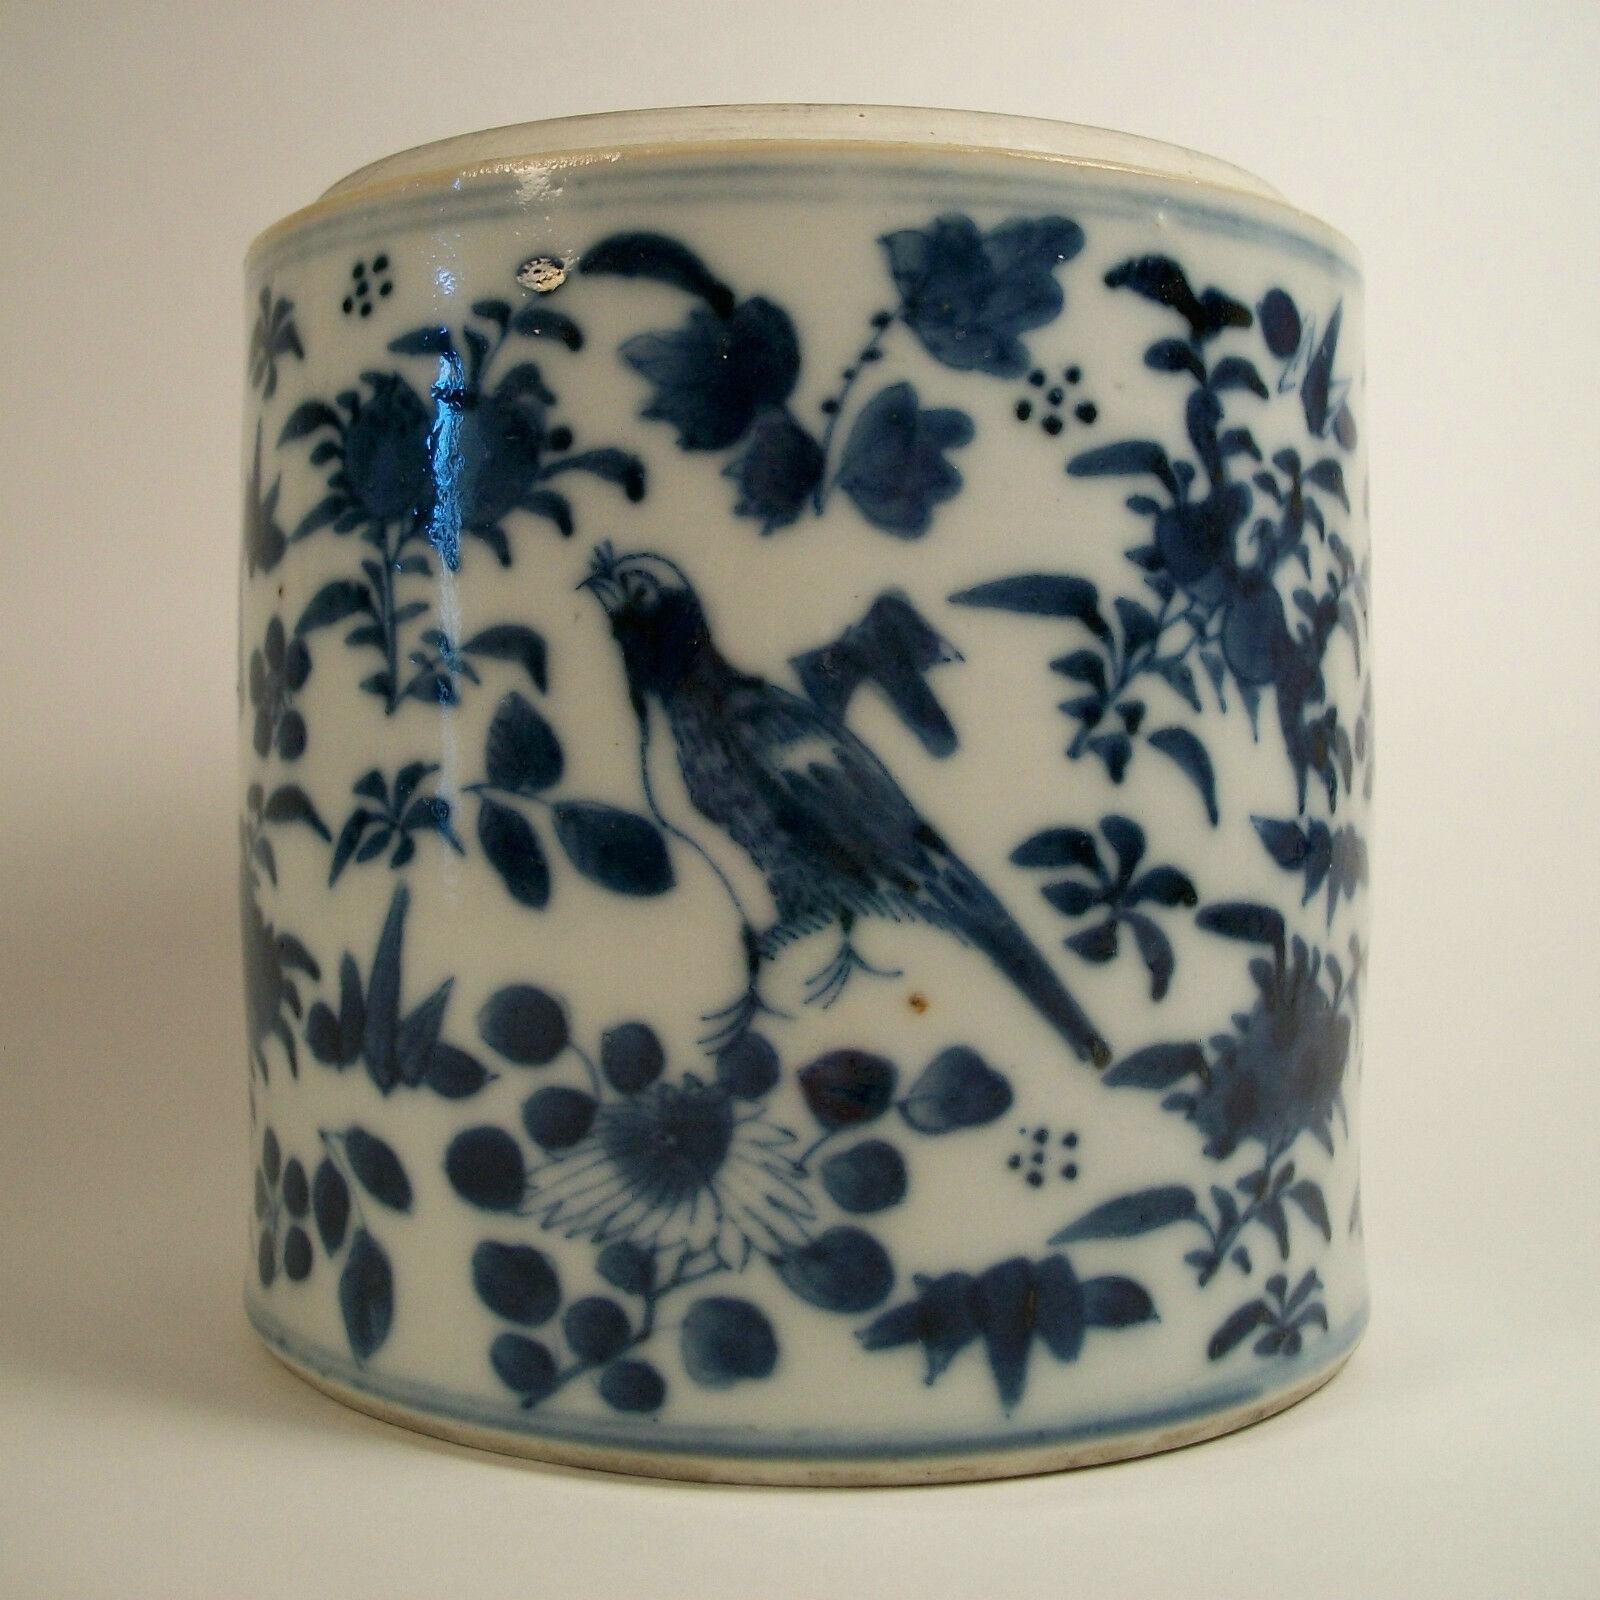 Antique blue and white porcelain tea caddy - hand painted in cobalt blue with birds and butterflies among flowering branches - non glazed lip and base rim - China - 19th century.

Fair antique condition - no lid - minor glaze chips to the rim -